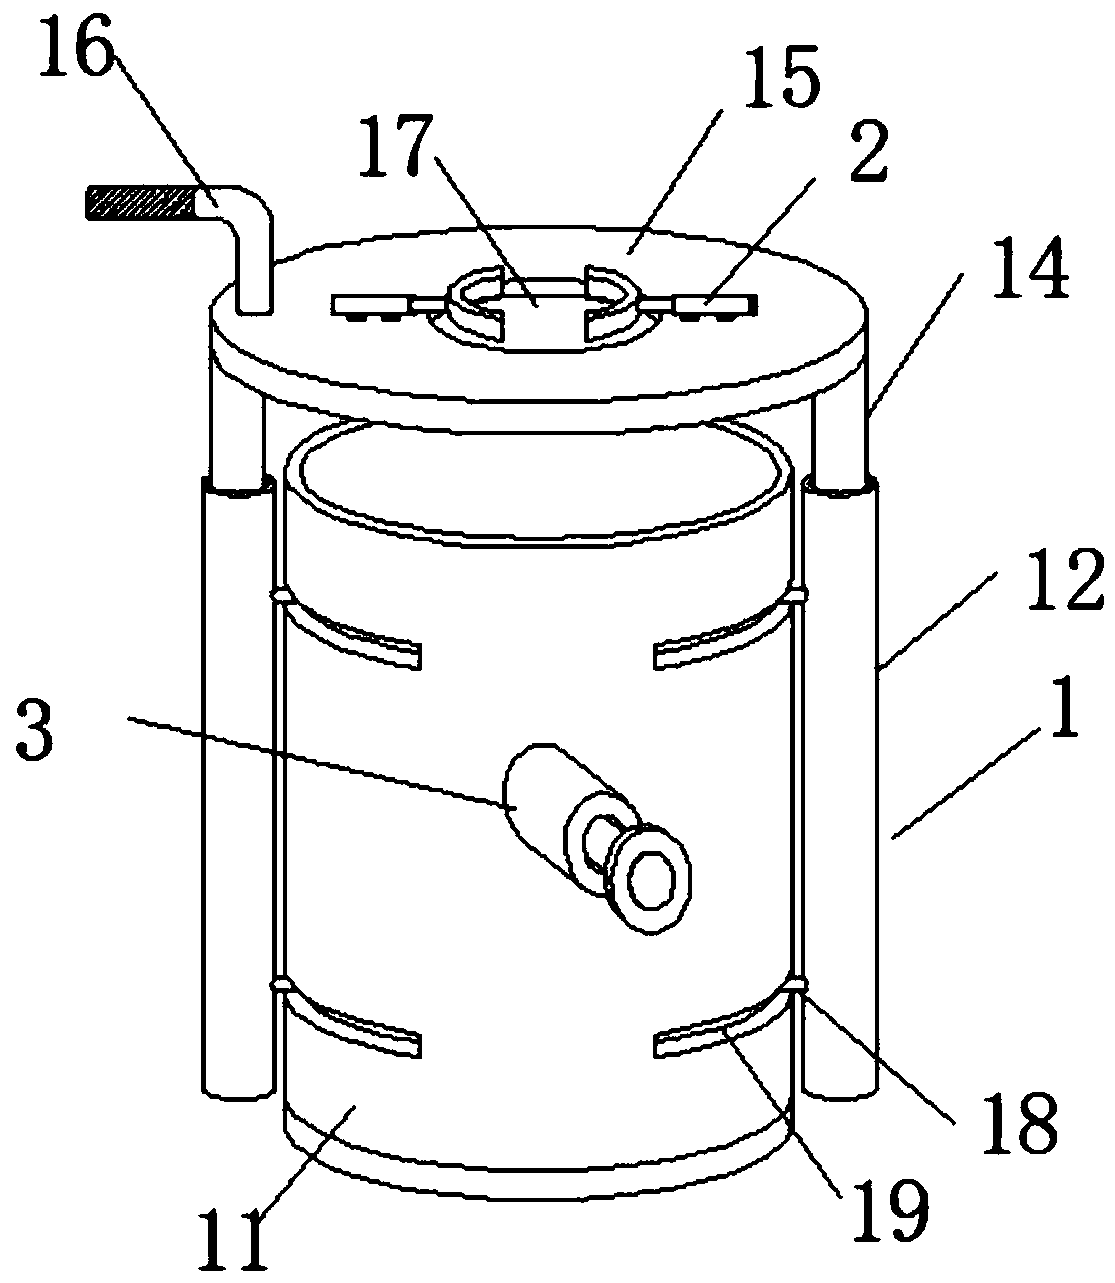 Manual cleaning device for writing brush cleaning